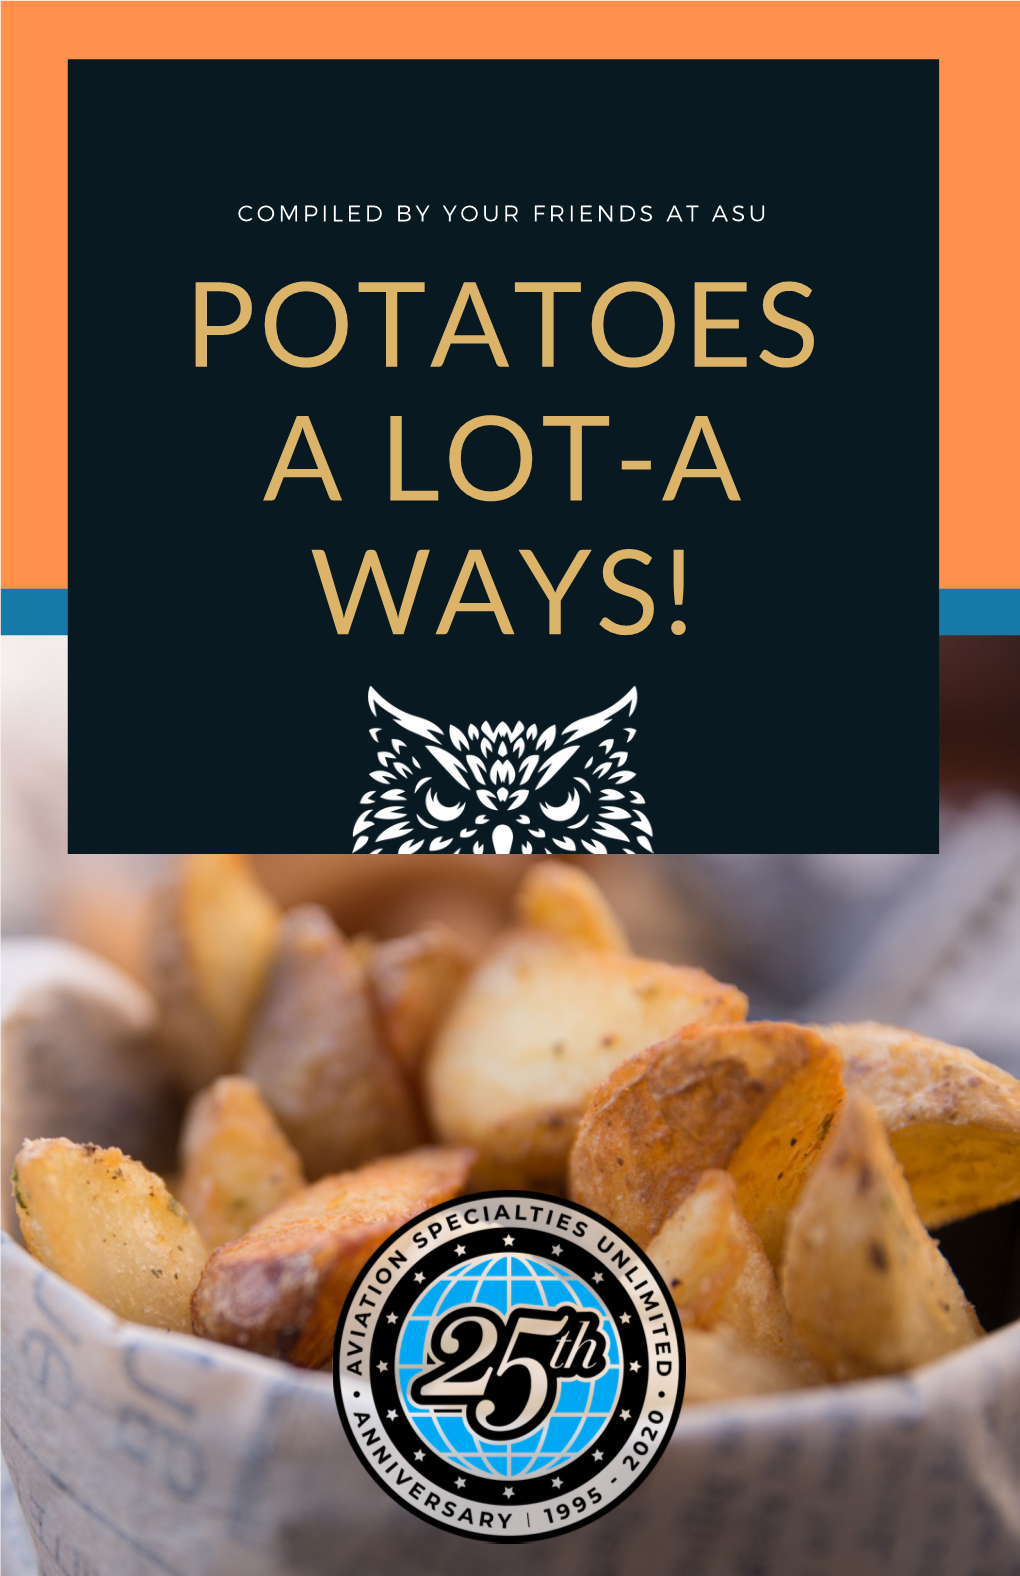 POTATOES a LOT-A WAYS! Greetings from Aviation Specialties Unlimited